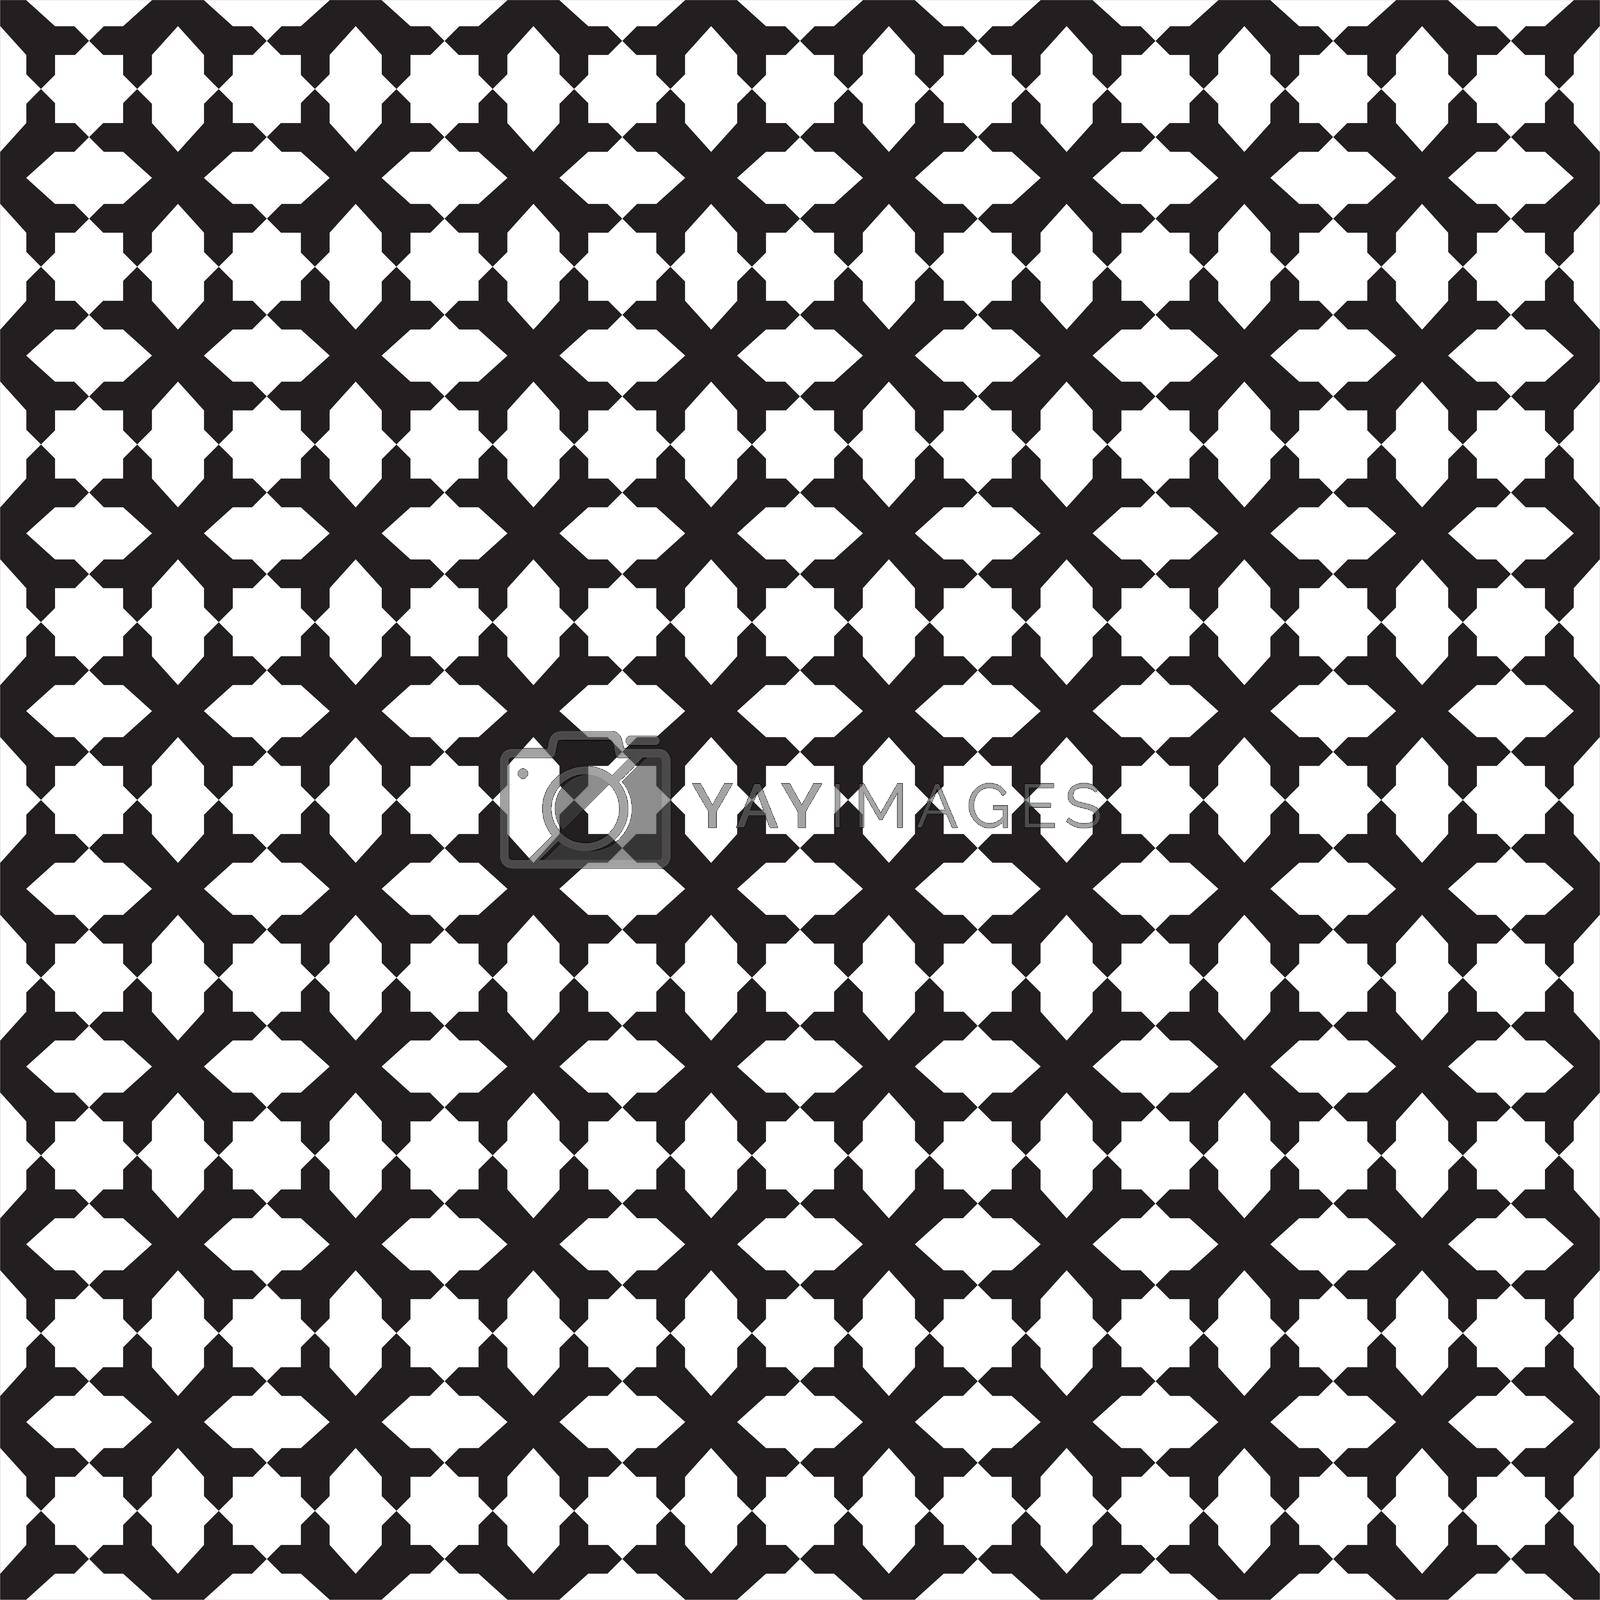 Geometric seamless pattern based on traditional Islamic ornament. Black and white.